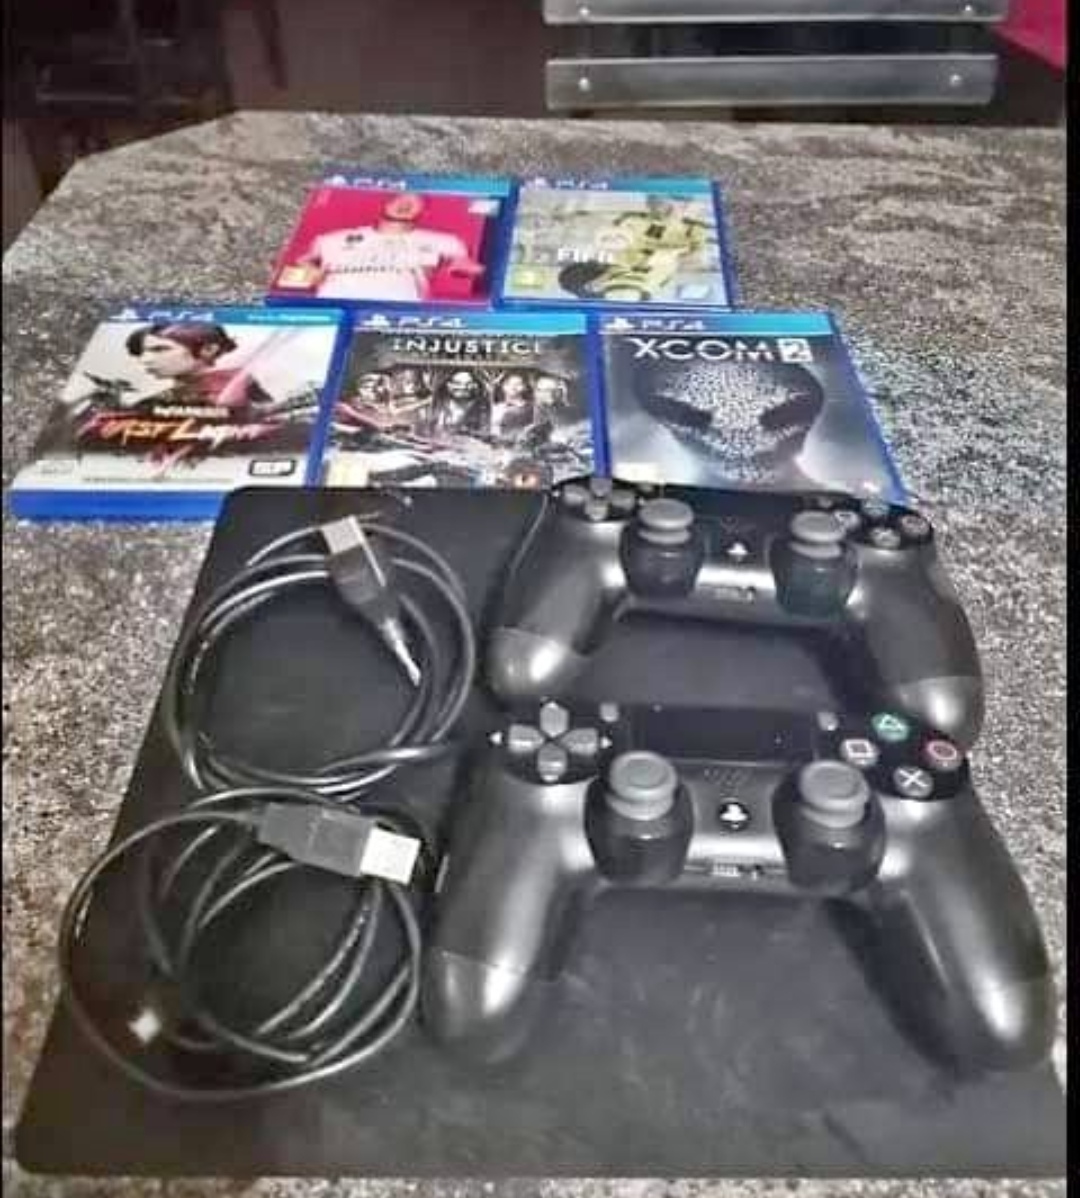 Playstation 4 Pro Consoles for sale in Pretoria, South Africa